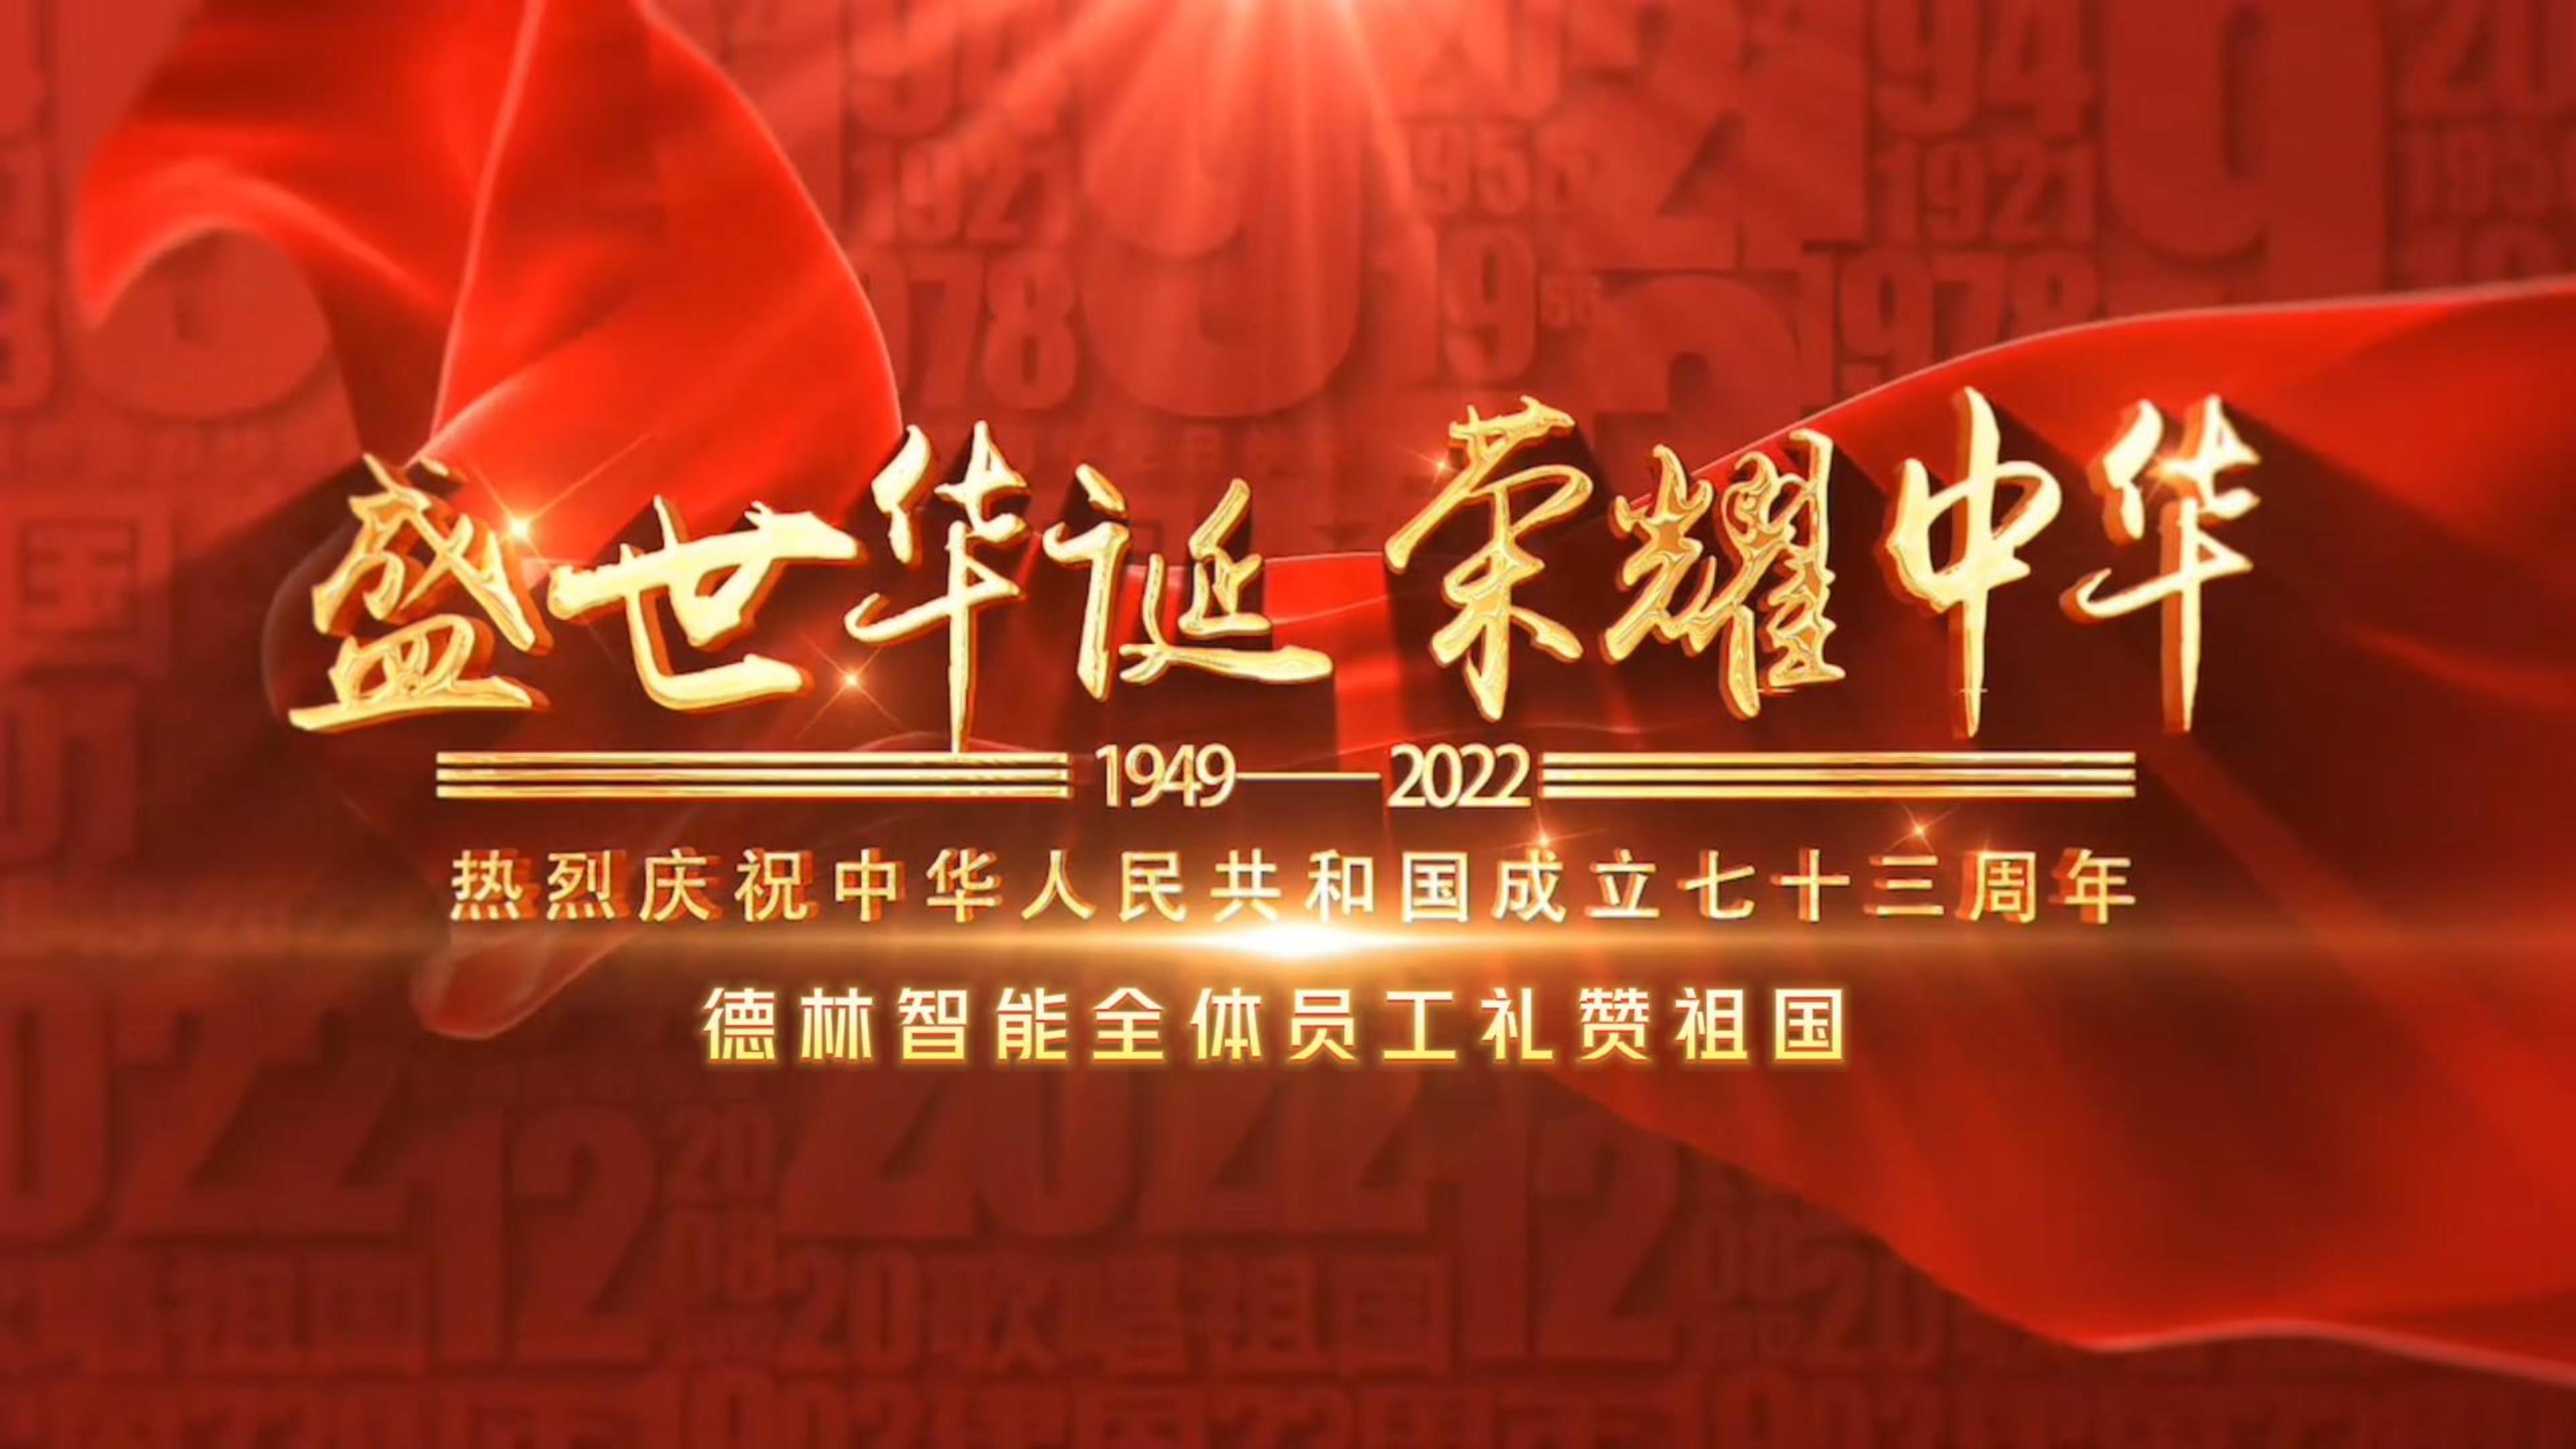 [Delin Information] Celebrating the 73rd anniversary of the founding of the People's Republic of China